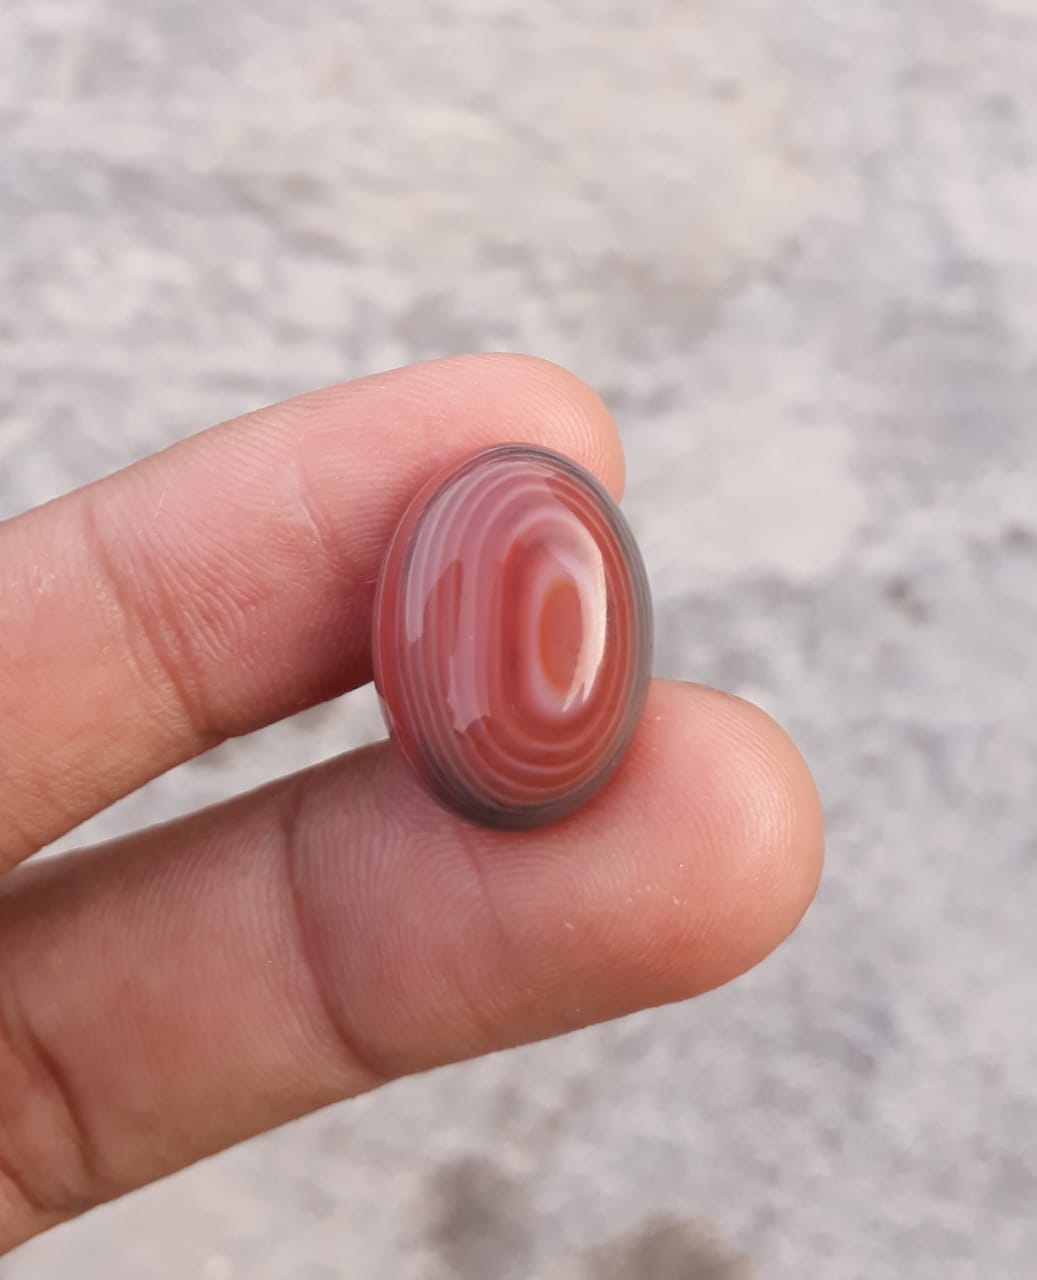 14.4ct Natural Red Eye Agate For Sale - Aqeeq - Dimension 20x15x6mm